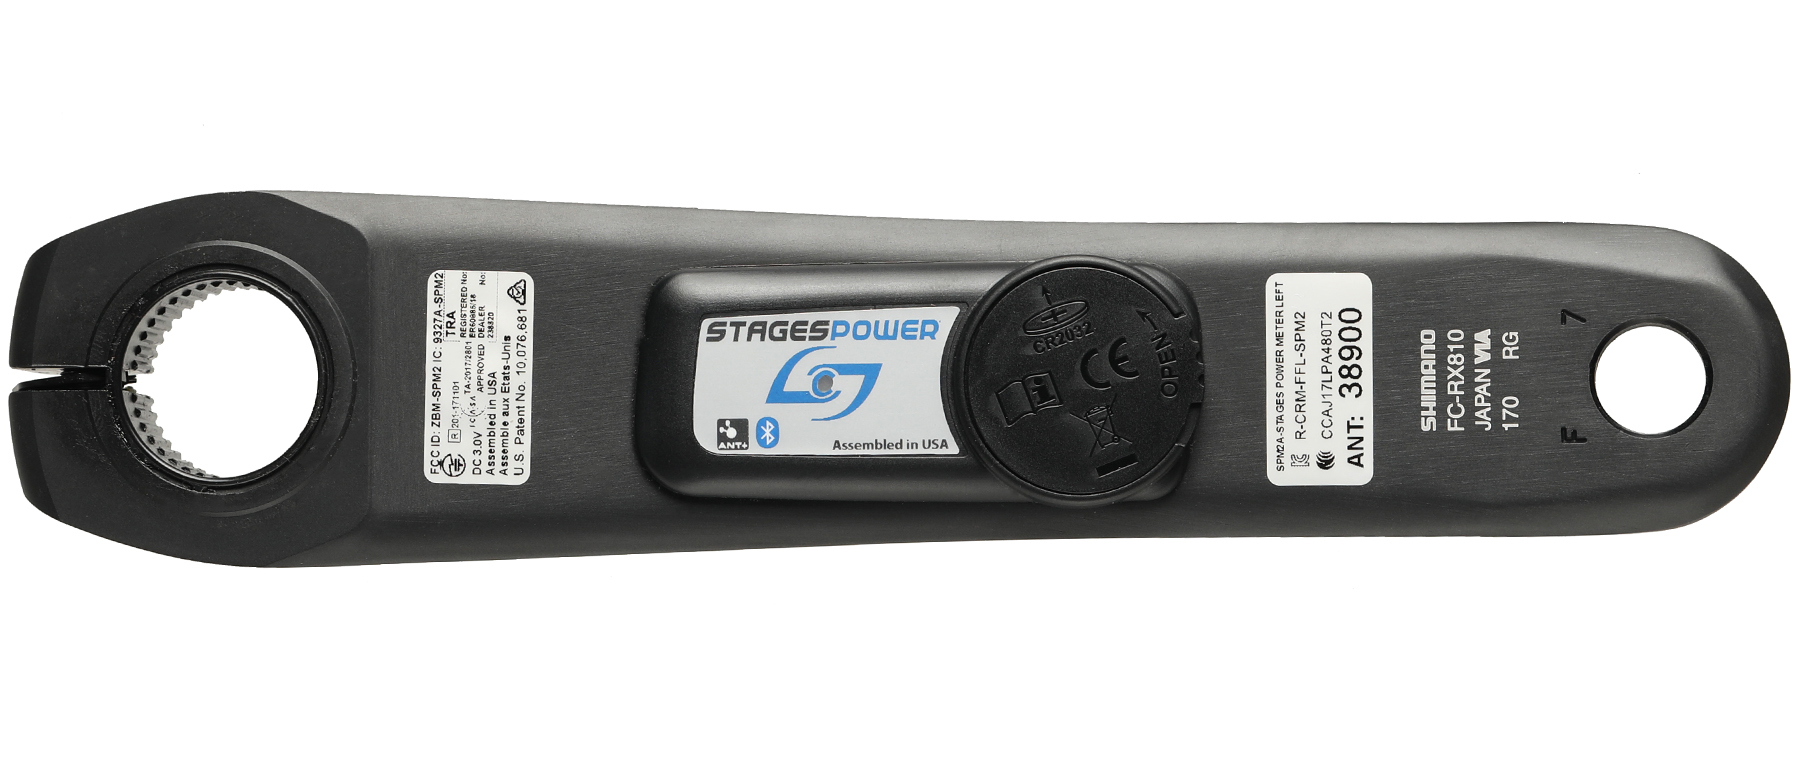 Stages Power L GRX FC-RX810 Power Meter